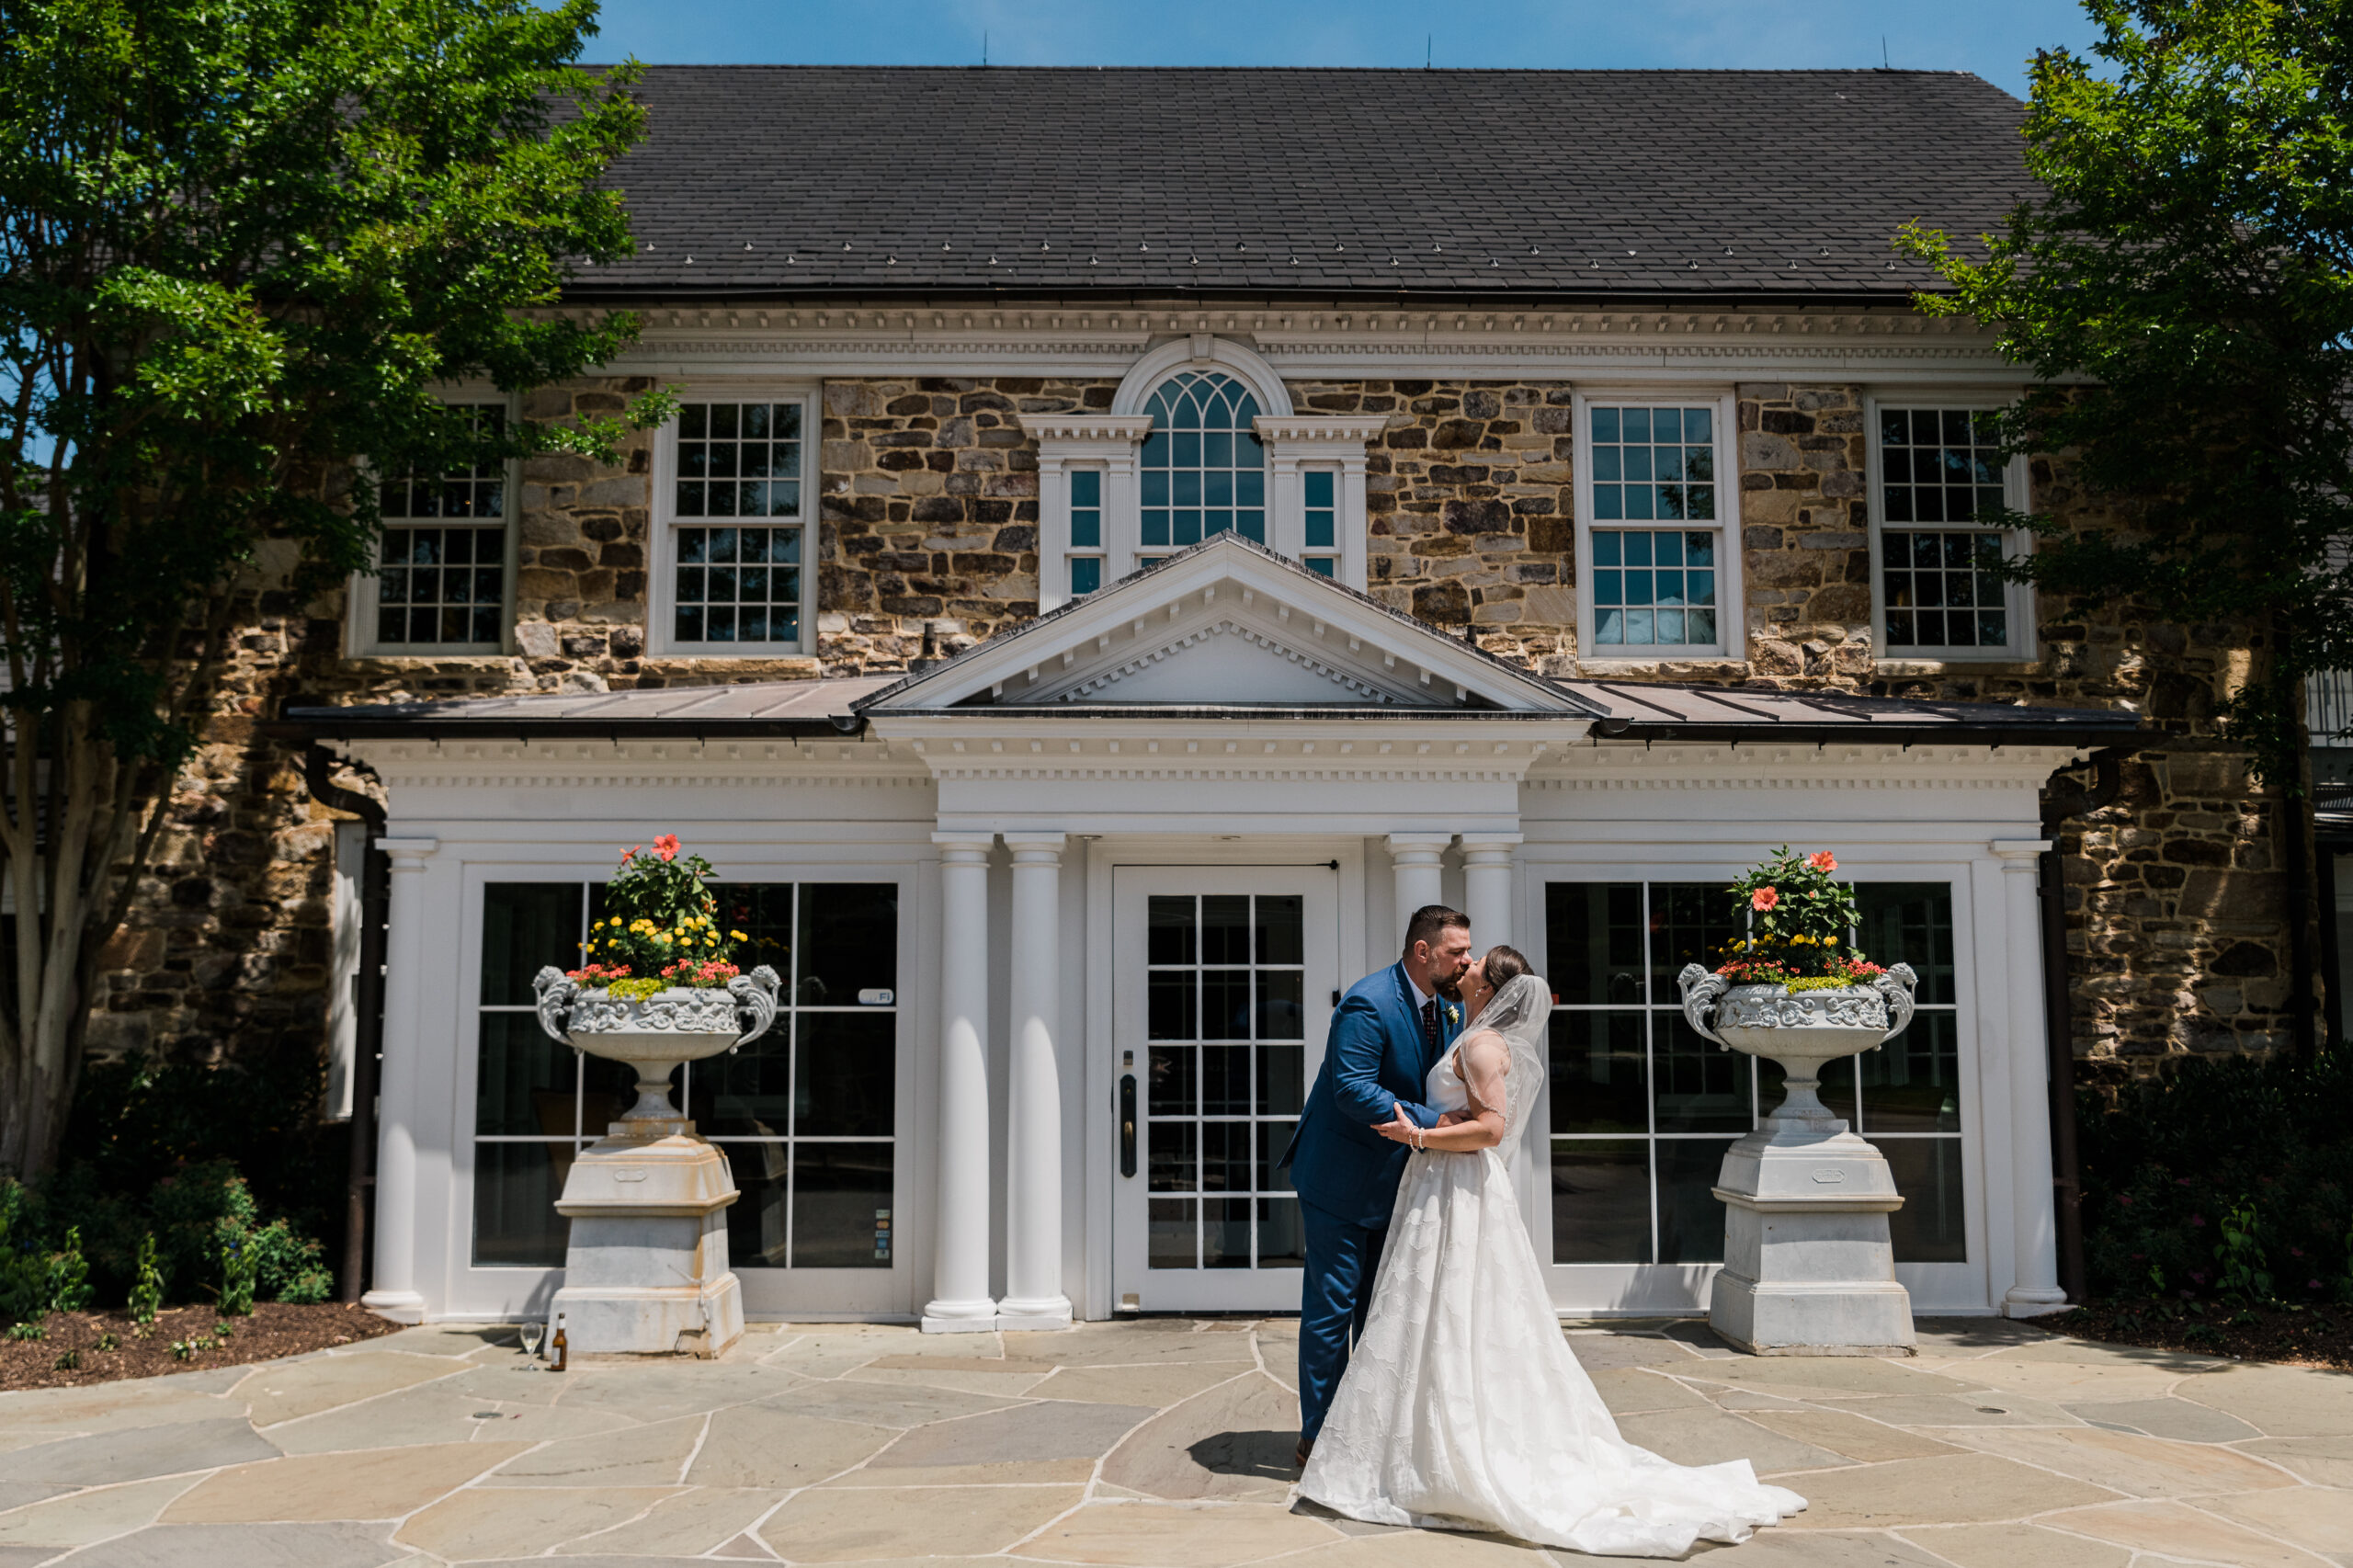 A bride and groom standing in front of a building kissing